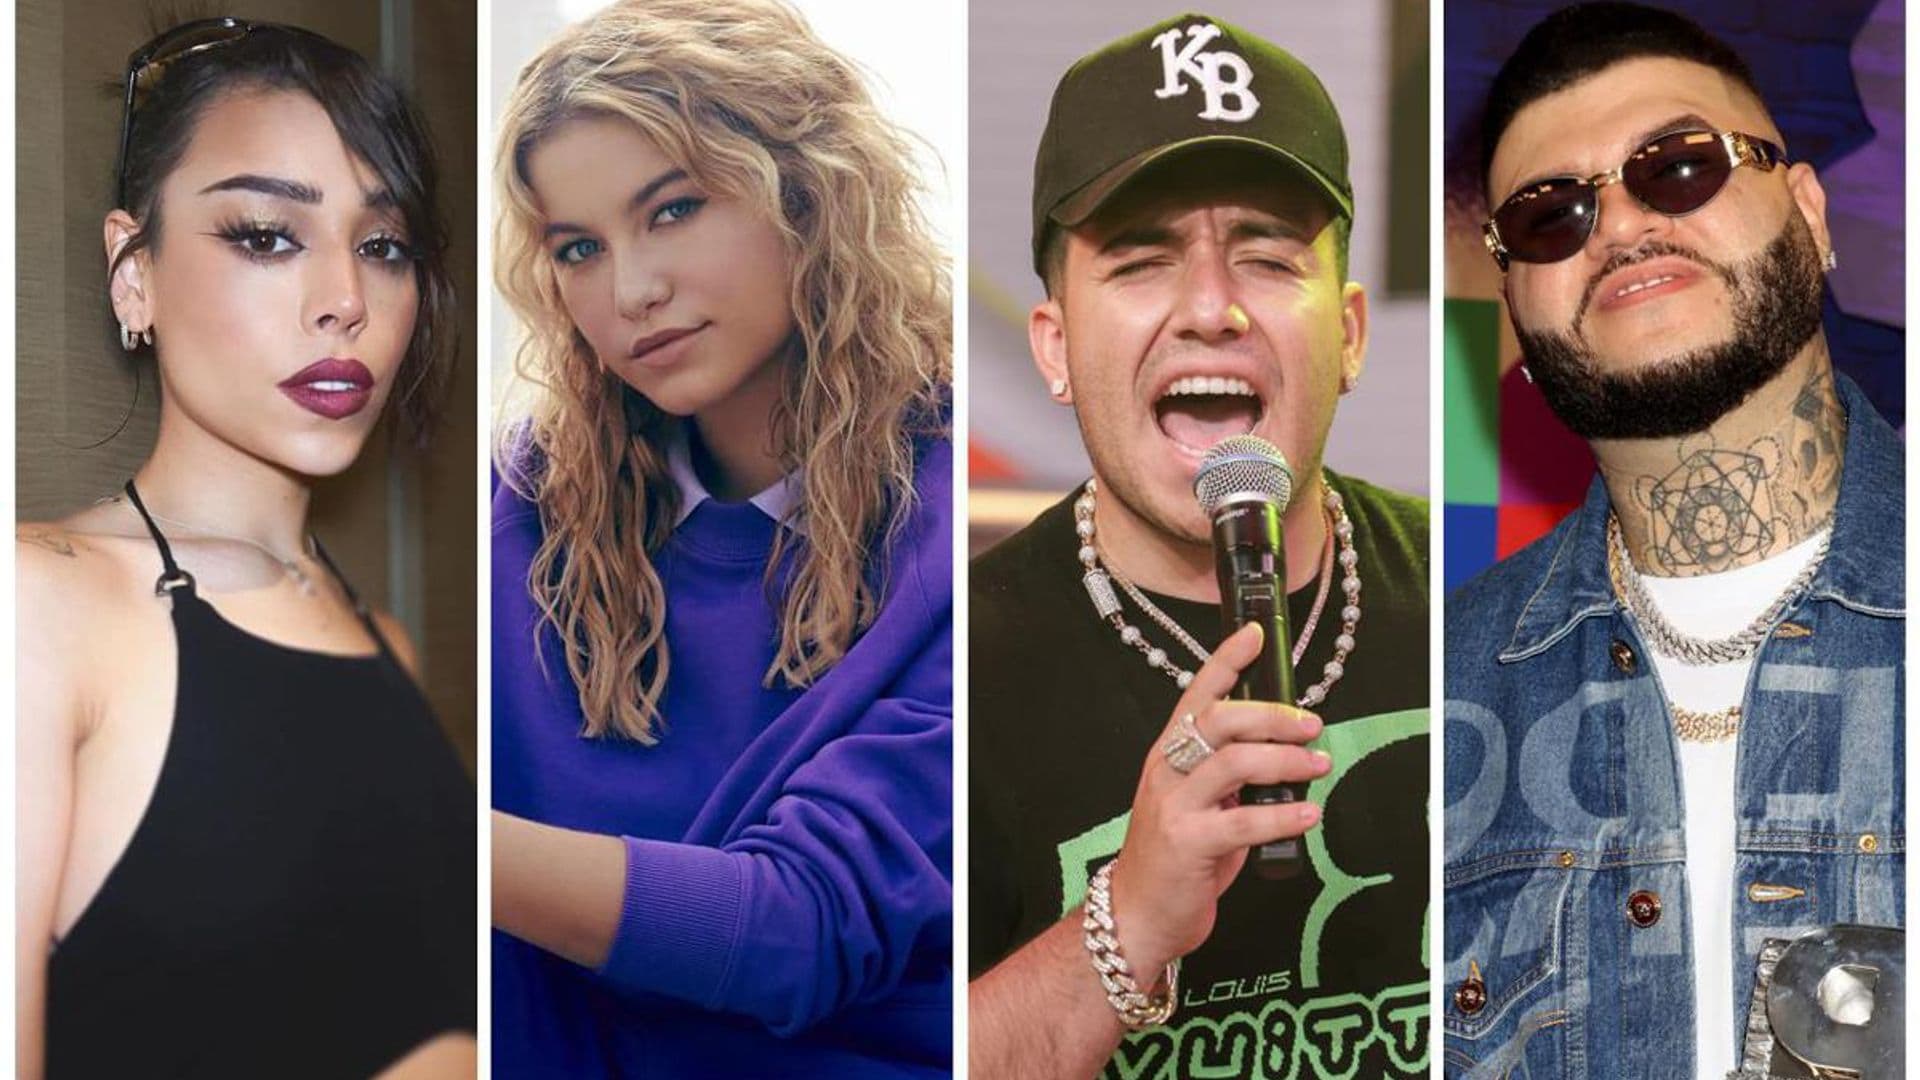 Premios Juventud Lineup: Get ready for electrifying performances from Danna Paola, Eslabon Armado, and more